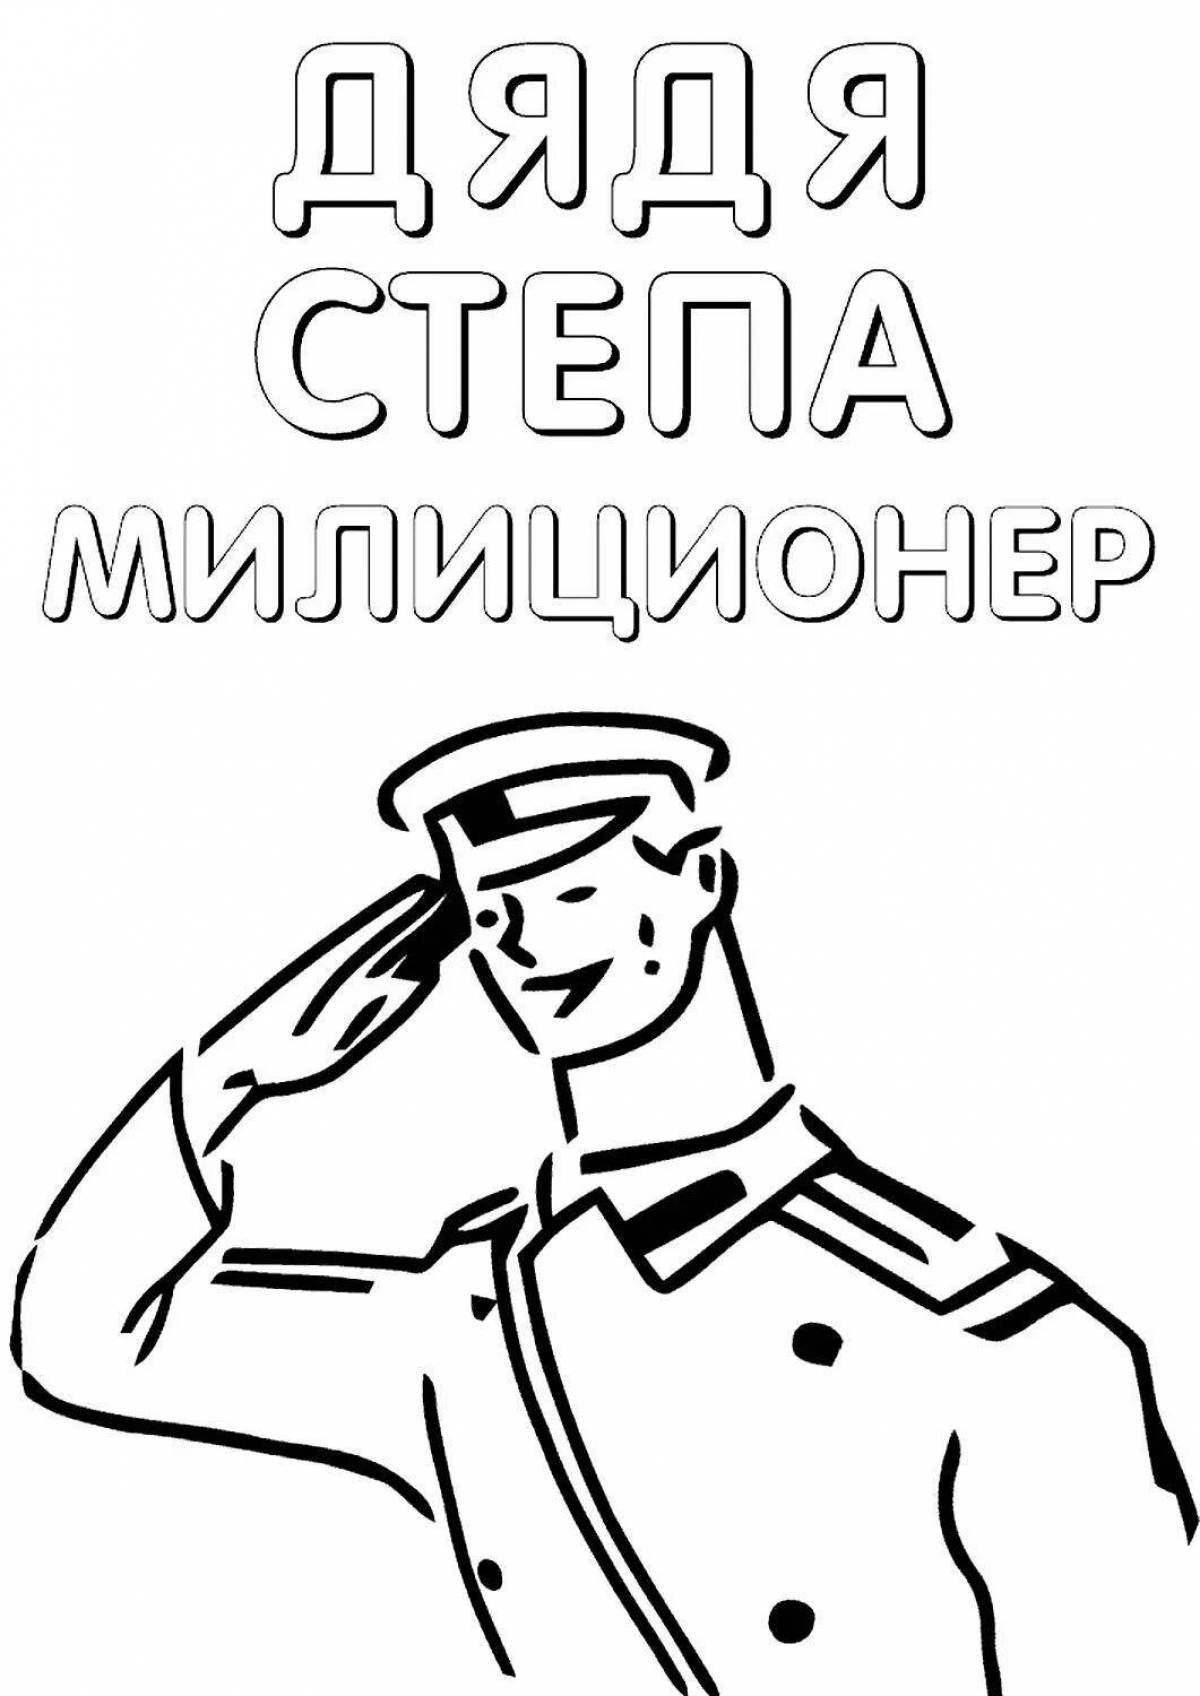 Mikhalkov's beautiful coloring book for kids